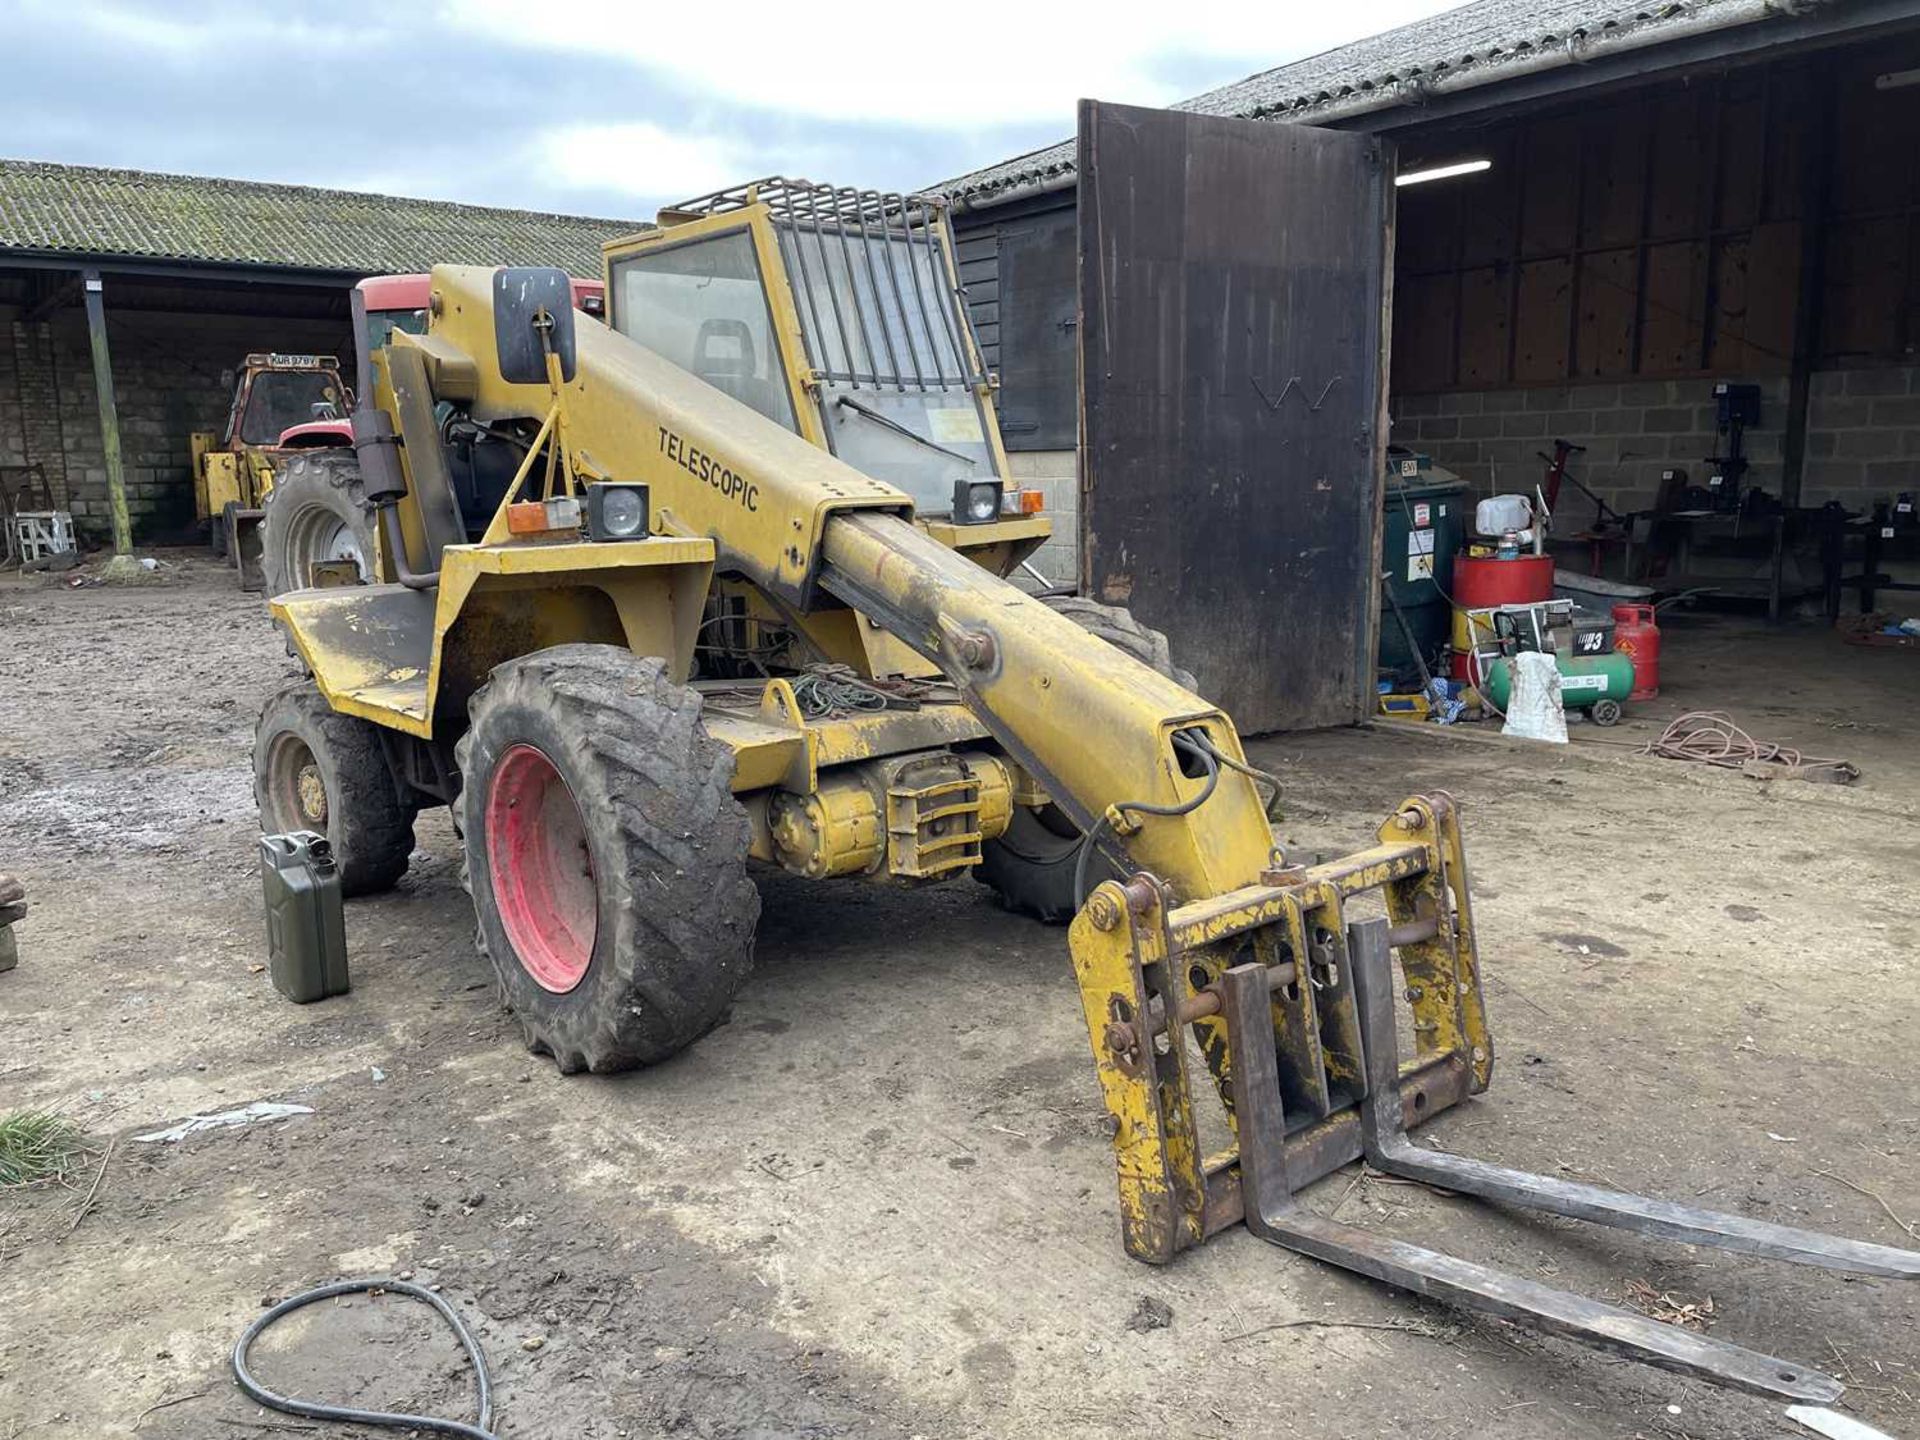 JCB Loadall Telescopic 520 4. Includes Tines. Reg: DCA 982X. 3,378 Hrs. Engine Needs Repair - Image 2 of 5